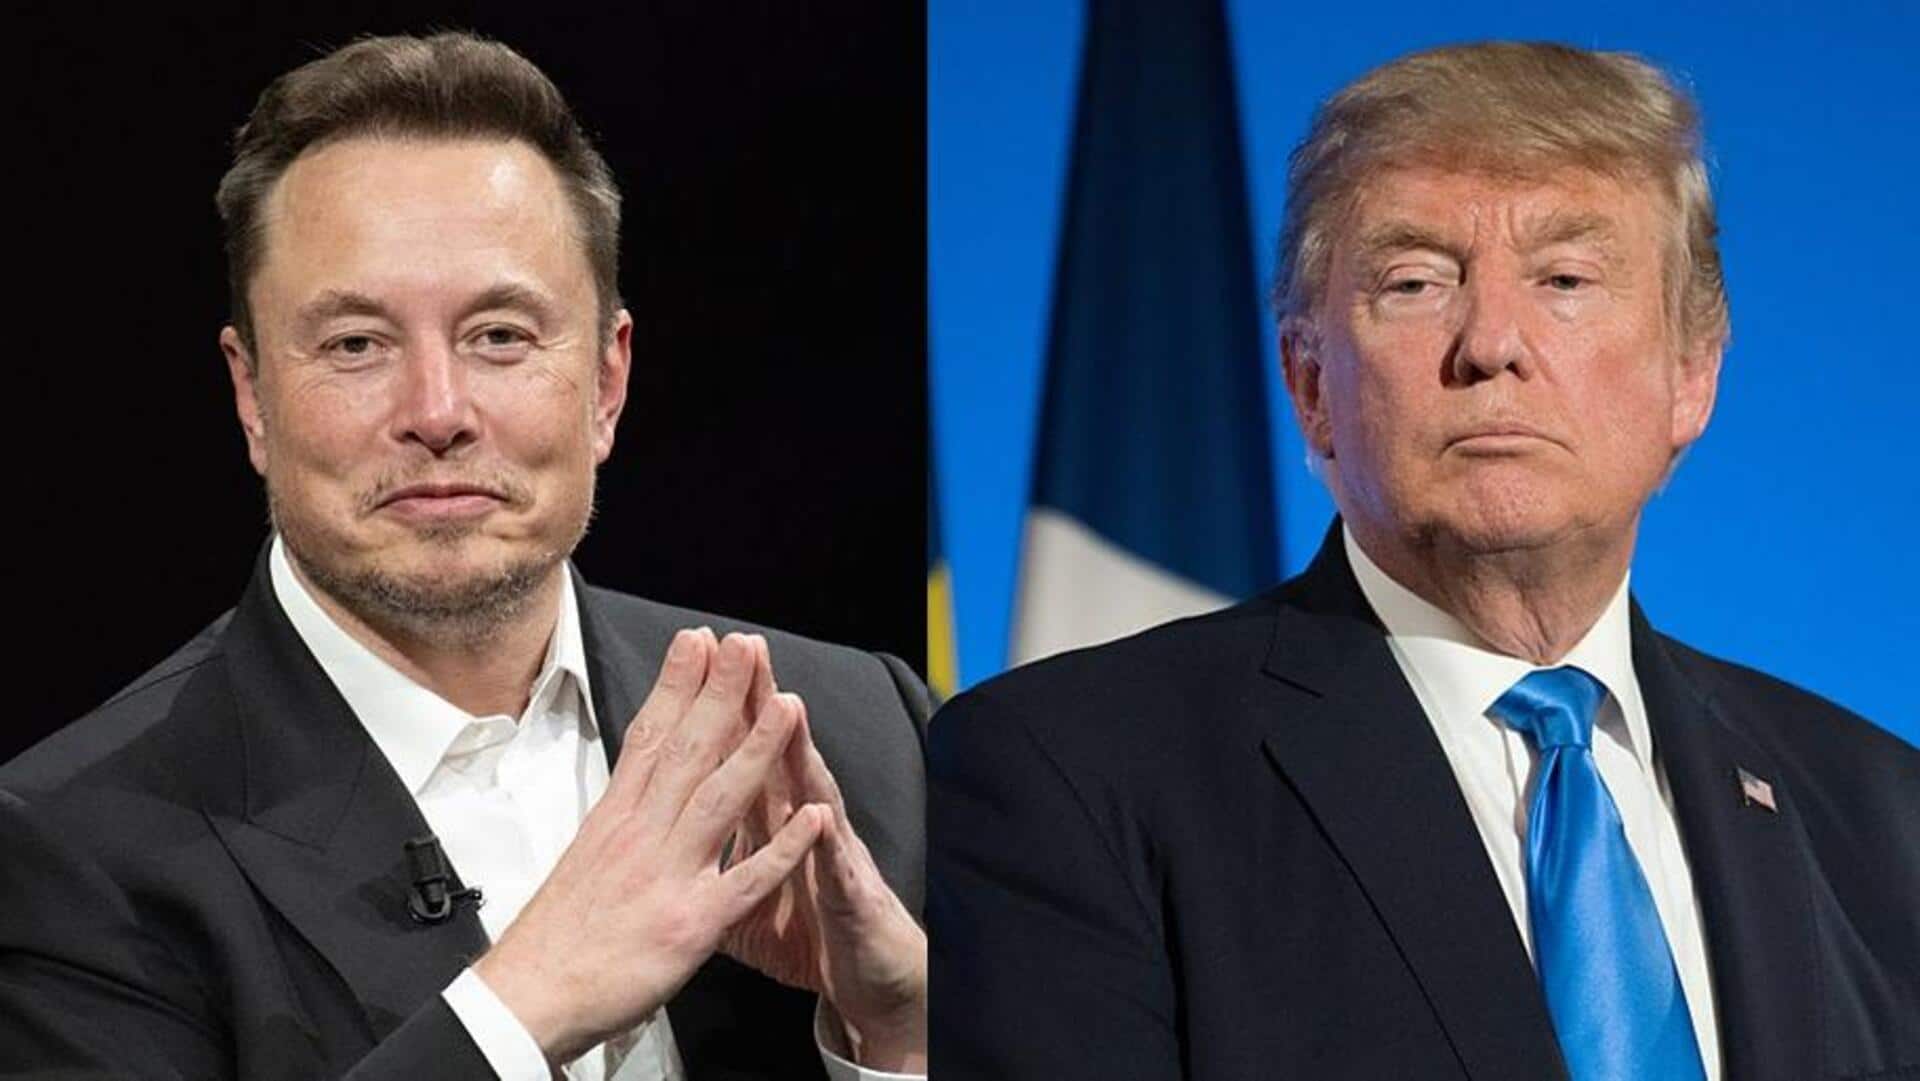 Donald Trump meets Elon Musk for potential presidential campaign support